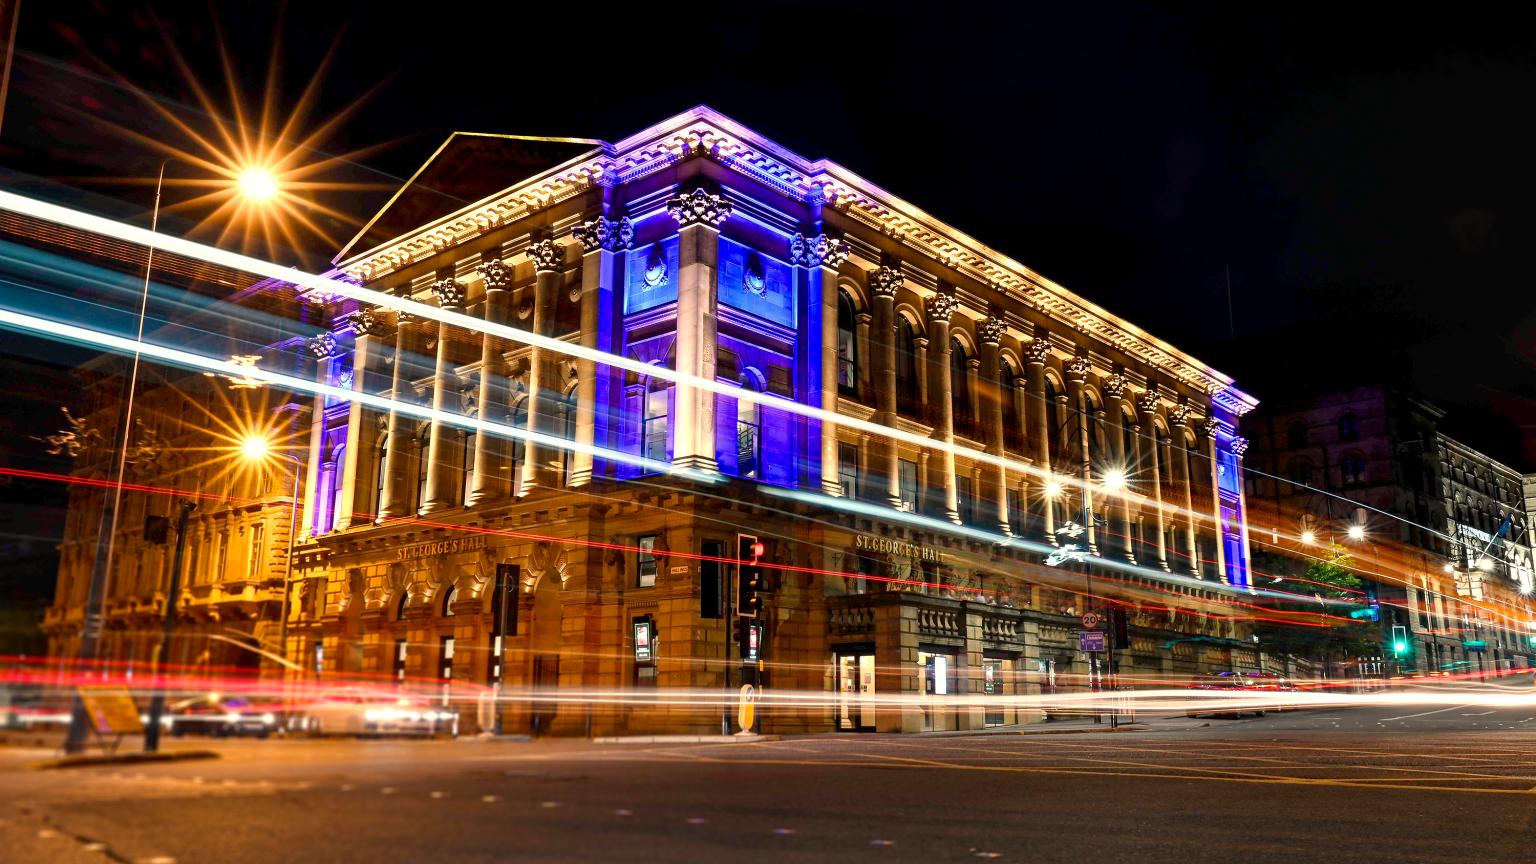 St. George’s Hall - The Best Live Music Venues in Bradford: An Evening at Napoleons Casino - Live Music Venue Bradford - Napoleons Casinos & Restaurants